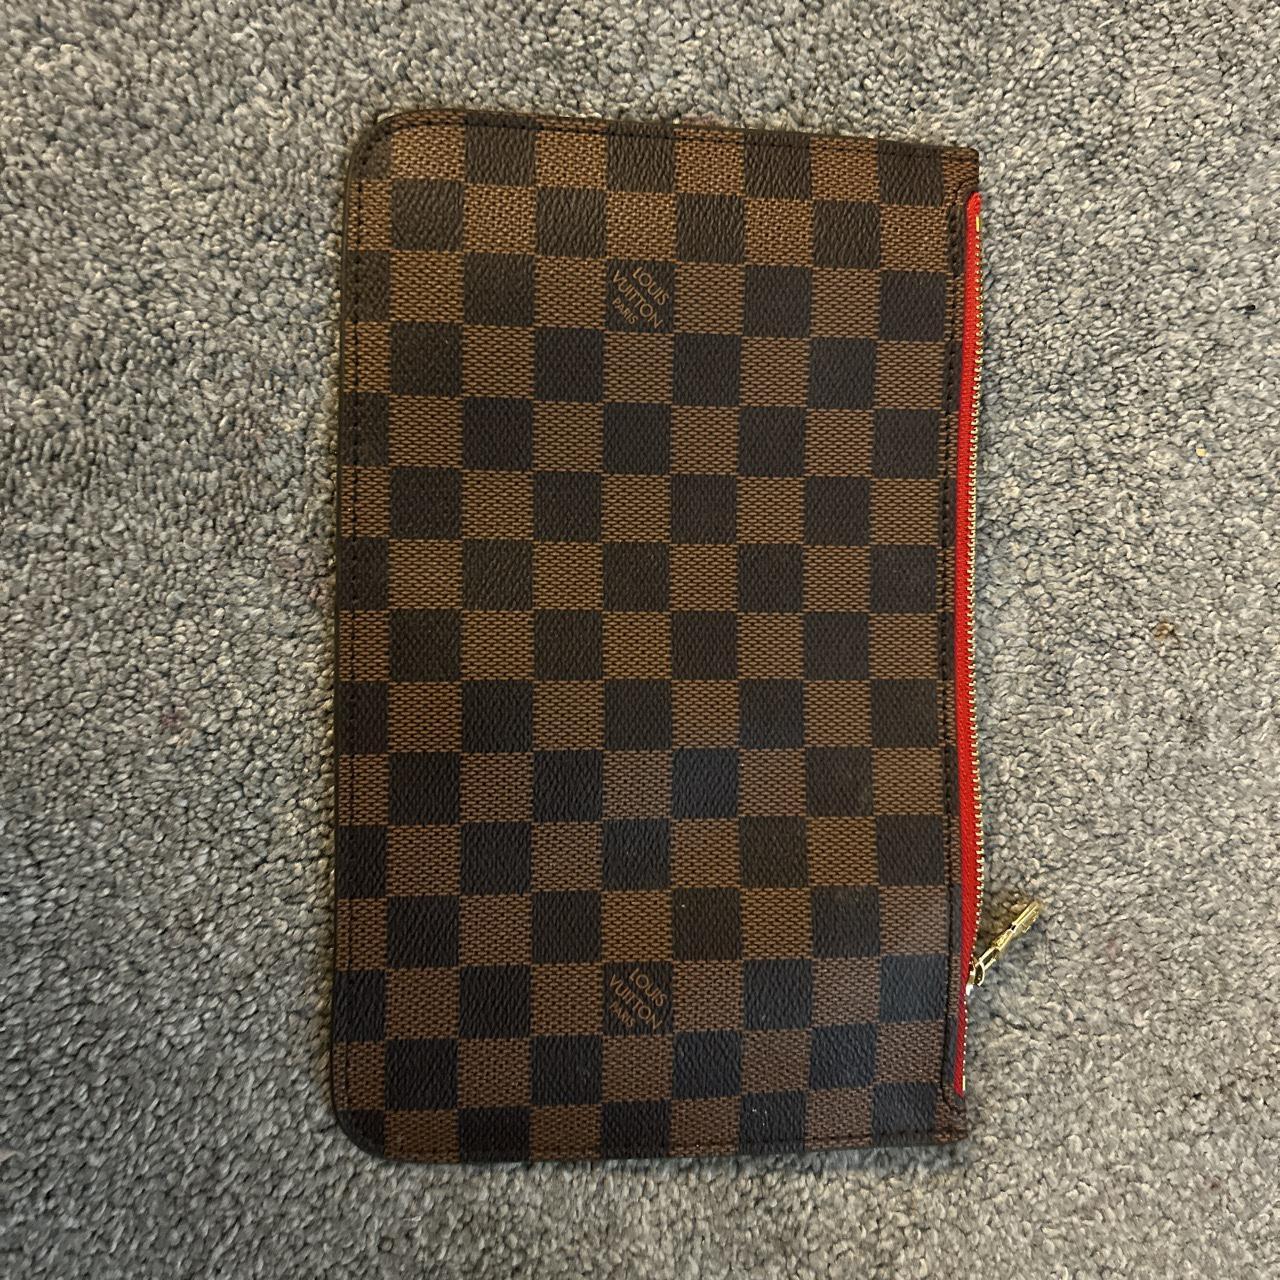 Louis Vuitton clutch that can be used as a small - Depop